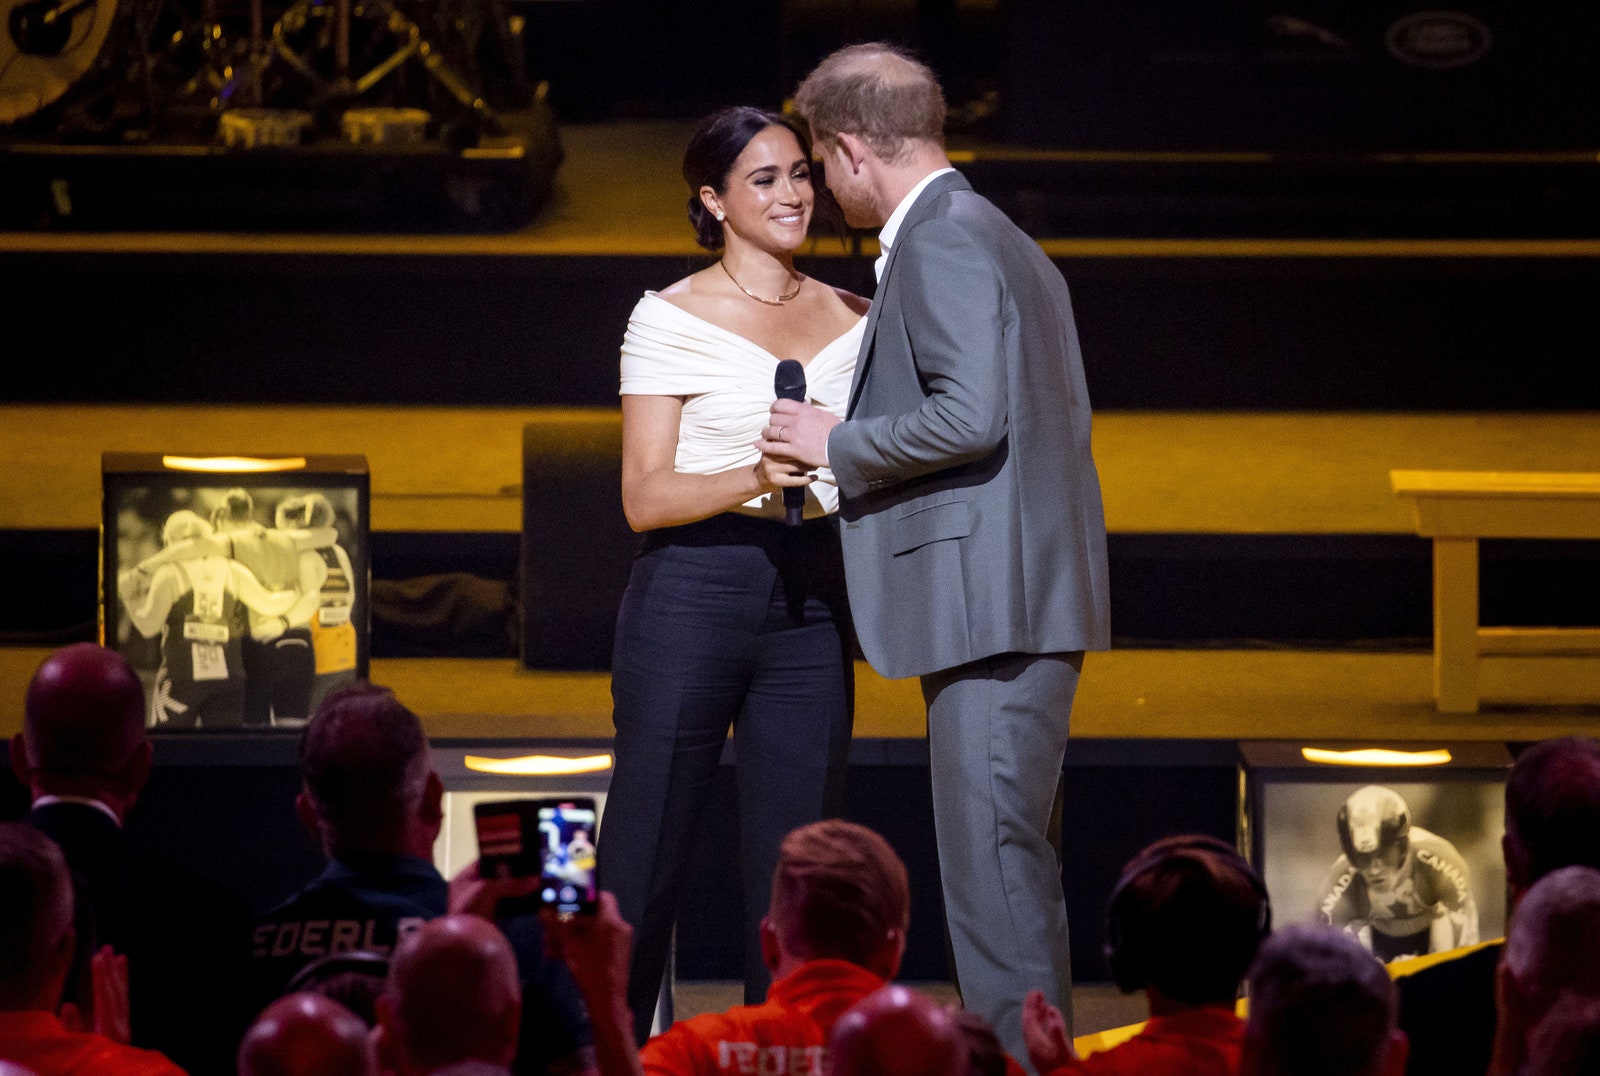 The Duke and Duchess of Sussex Prince Harry and Meghan Markle attend the opening ceremony of The Invictus Games in The...